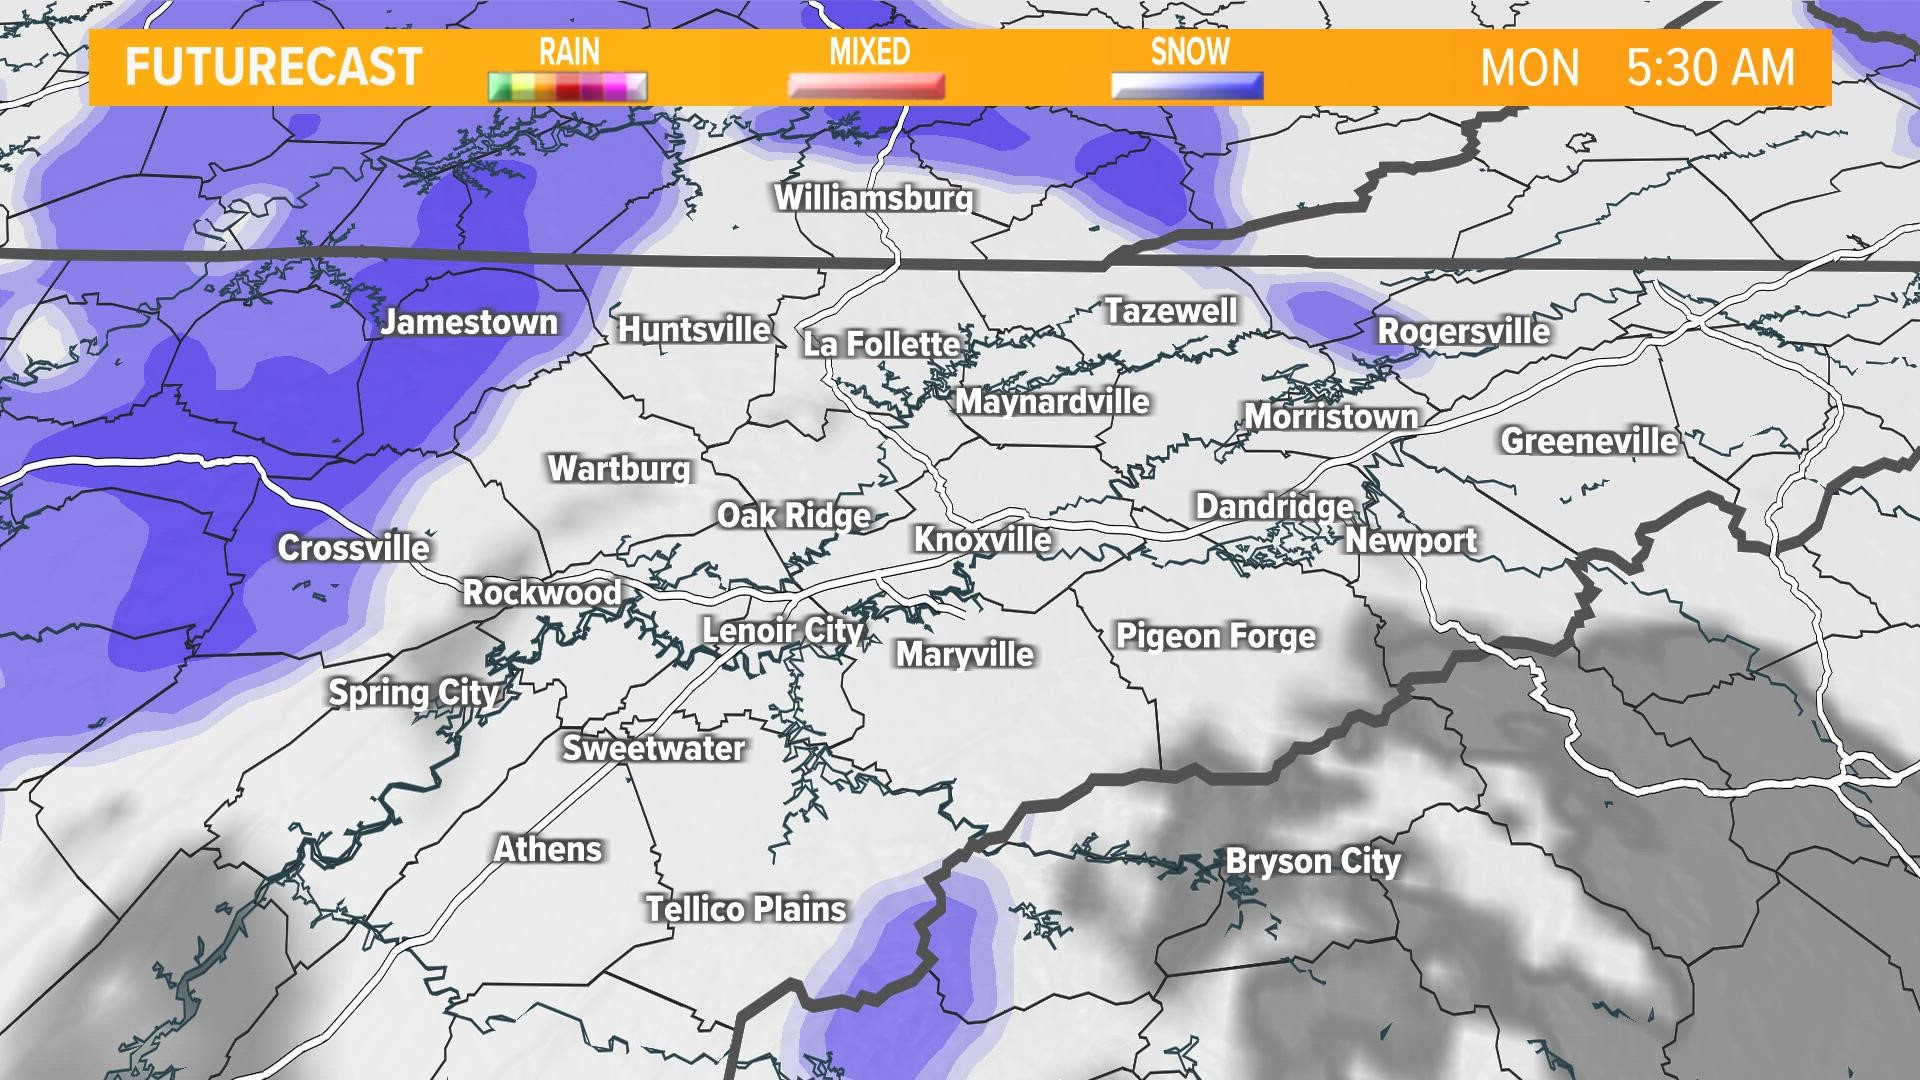 A few light snow showers/flurries to get this Monday started